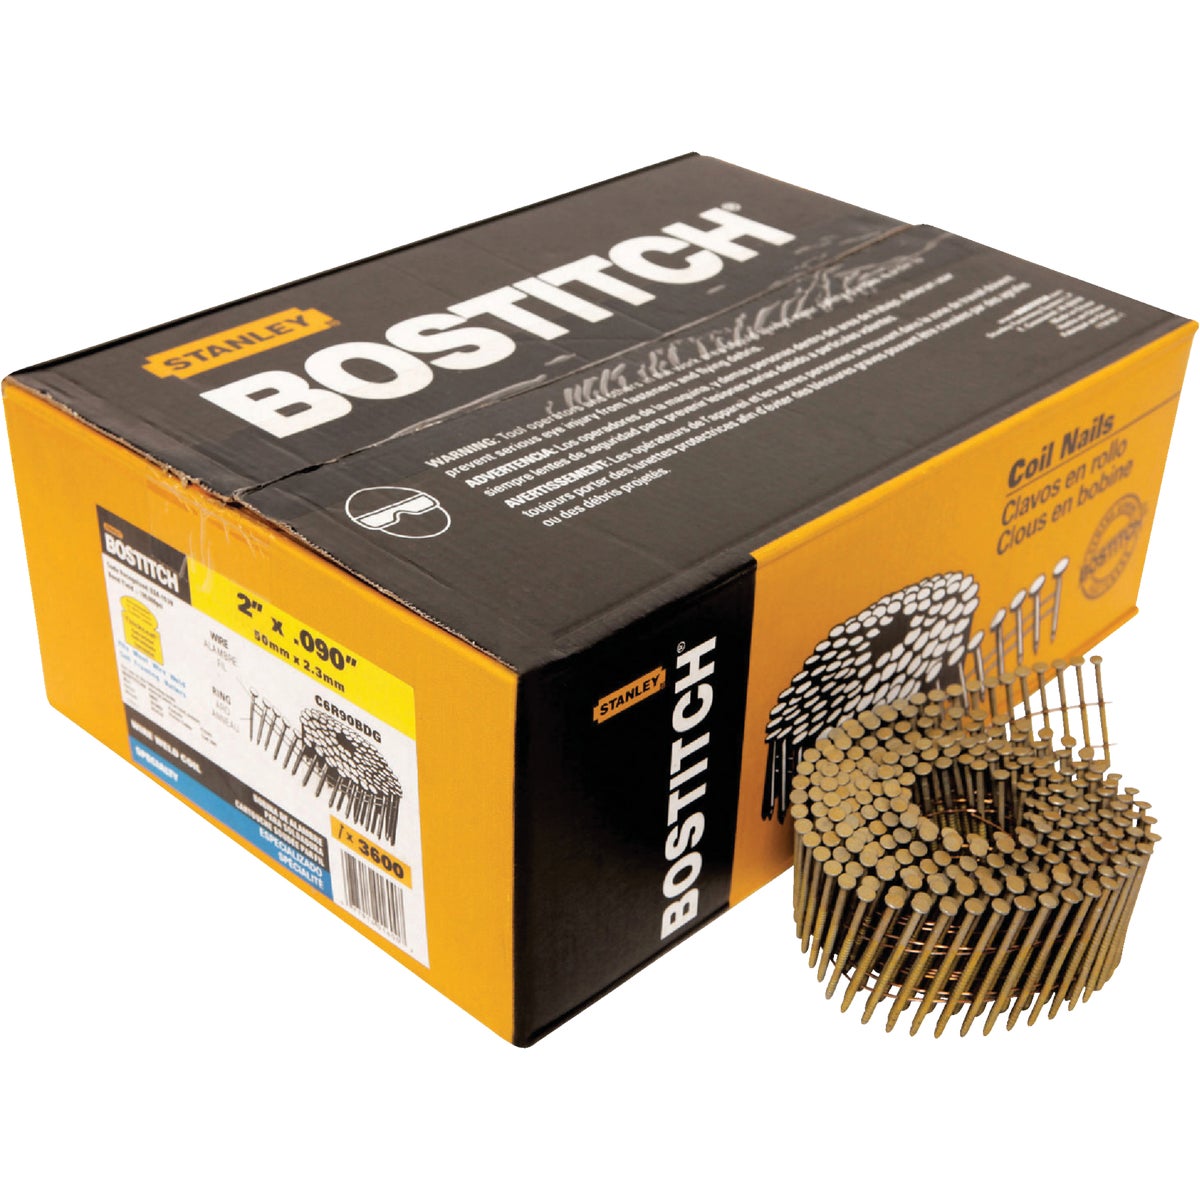 Bostitch 15 Degree Wire Weld Galvanized Coil Siding Nail, 2 In. x .092 In. (3600 Ct.)